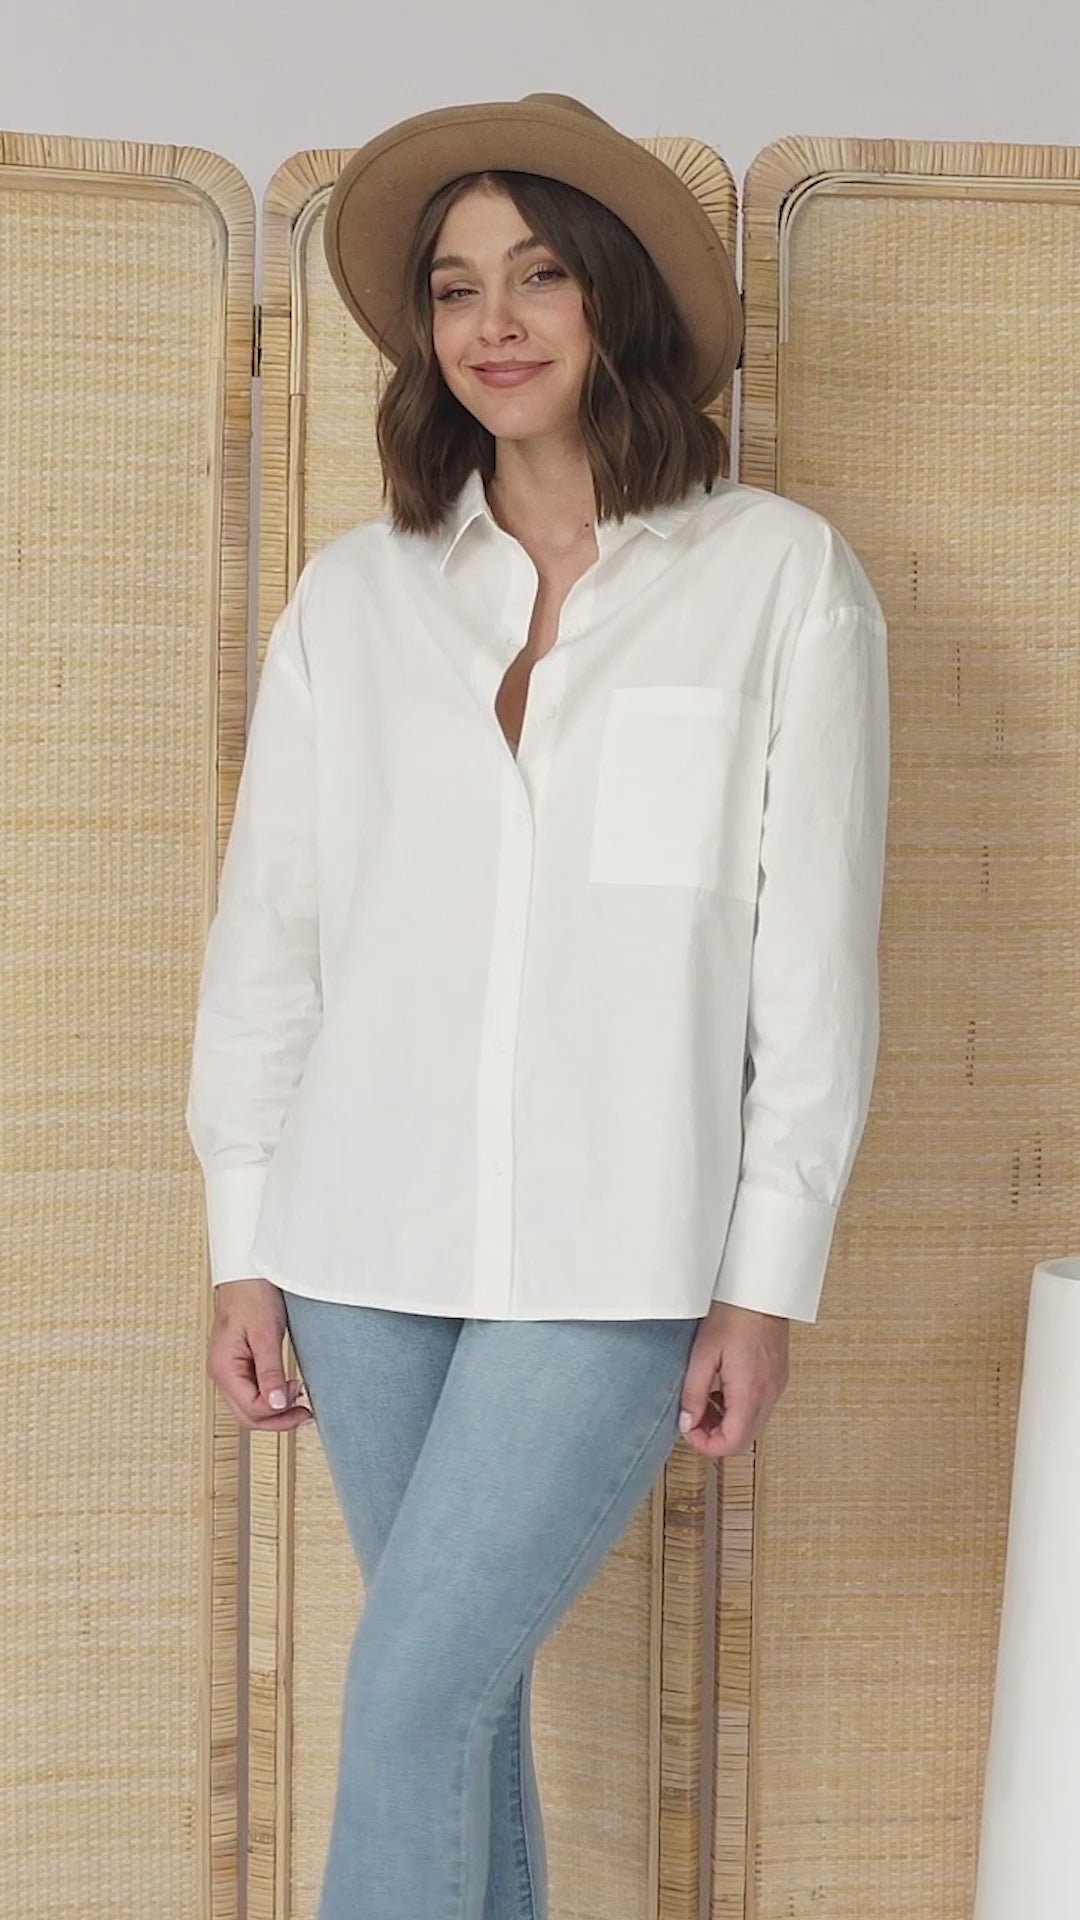 Adriel Shirt - Classic Collared Button Down with Buttoned Cuffs in White